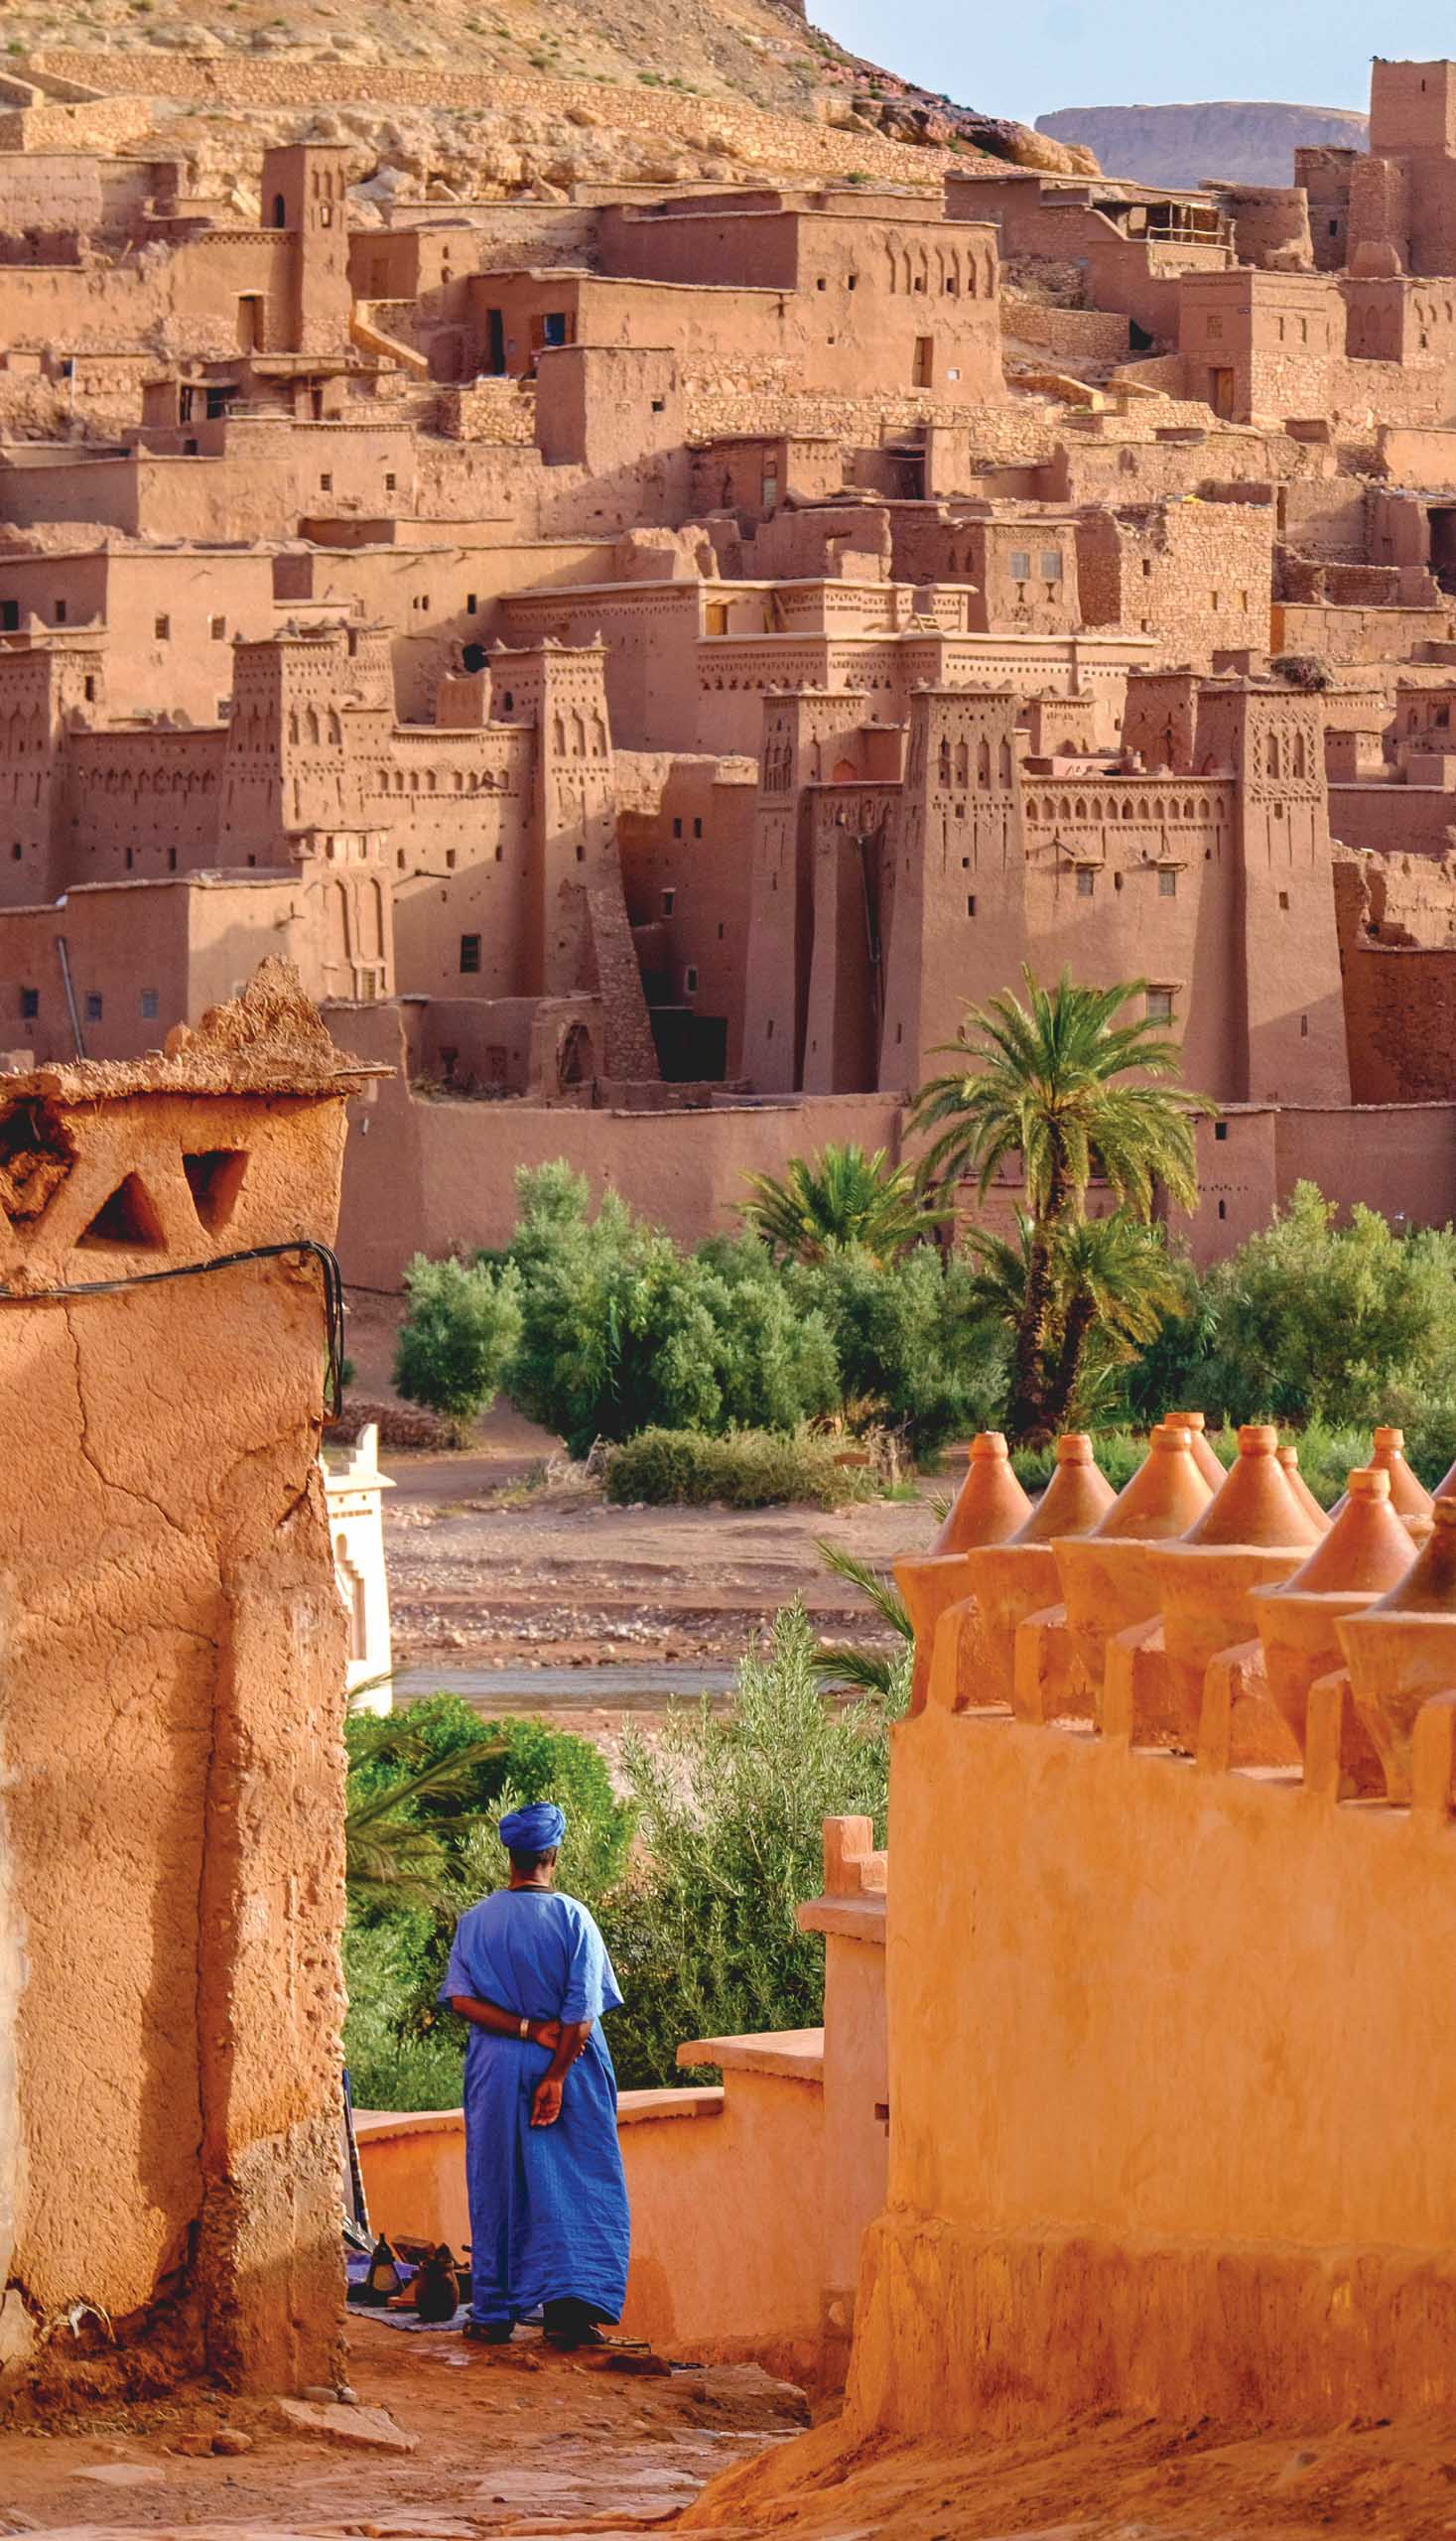 A local inhabitant of Ait Ben Haddou contemplating the old city (ksar) lightened by morning light.